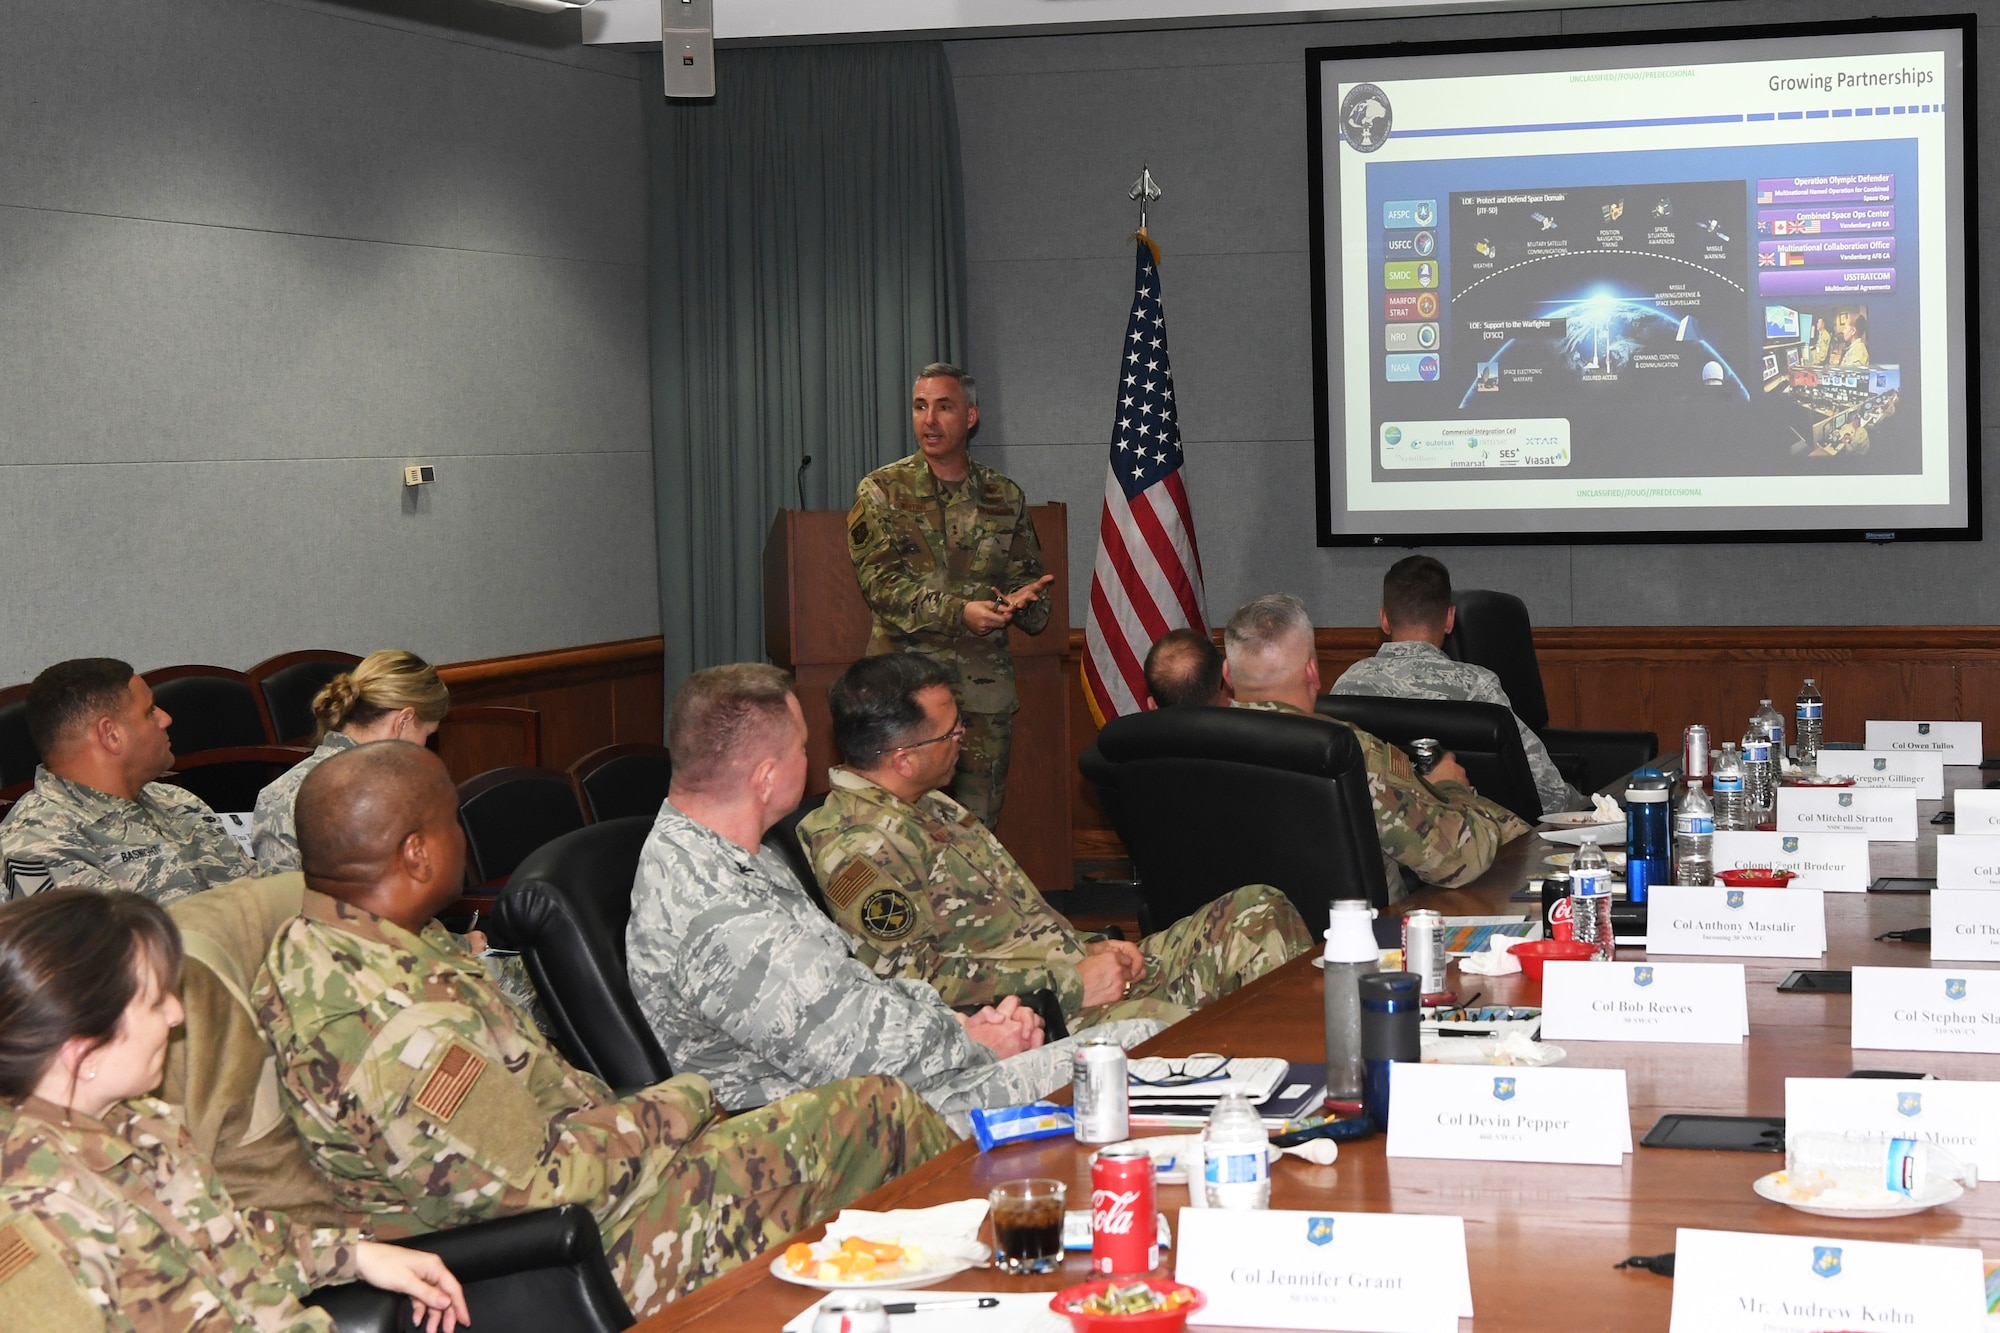 Maj. Gen. Stephen Whiting, 14th Air Force commander, speaks to wing commanders and leaders during a commander’s conference at Peterson Air Force Base, May 7, 2019. During the conference Whiting delivered guidance associated with the 14th Air Force strategic plan, key initiatives, and organizational changes designed to support the future standup of U.S. Space Command. During the conference Lt. Gen. (ret) Glen “Wally” Moorhead, Department of Defense space mentor, and former 50th Space Wing commander, also met with the space commanders to reflect on how they can lead through change, and prepare for a war in space. (U.S. Air Force photo by Maj. Cody Chiles)